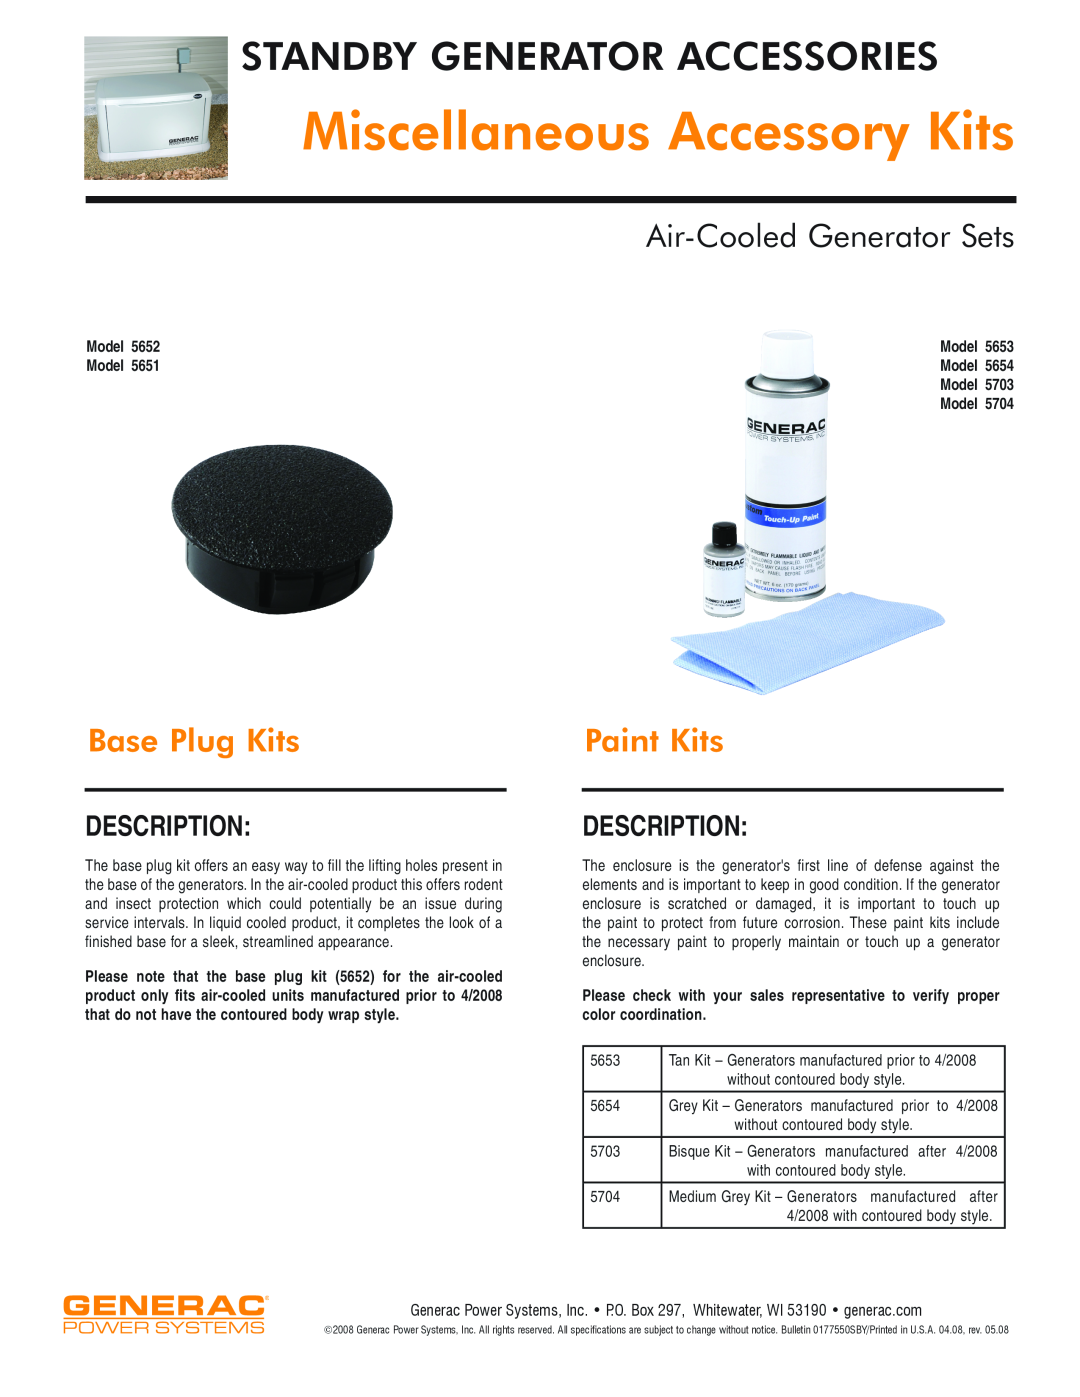 Generac Power Systems 5621 Base Plug Kits, Paint Kits, Miscellaneous Accessory Kits, Standby Generator Accessories, 5652 